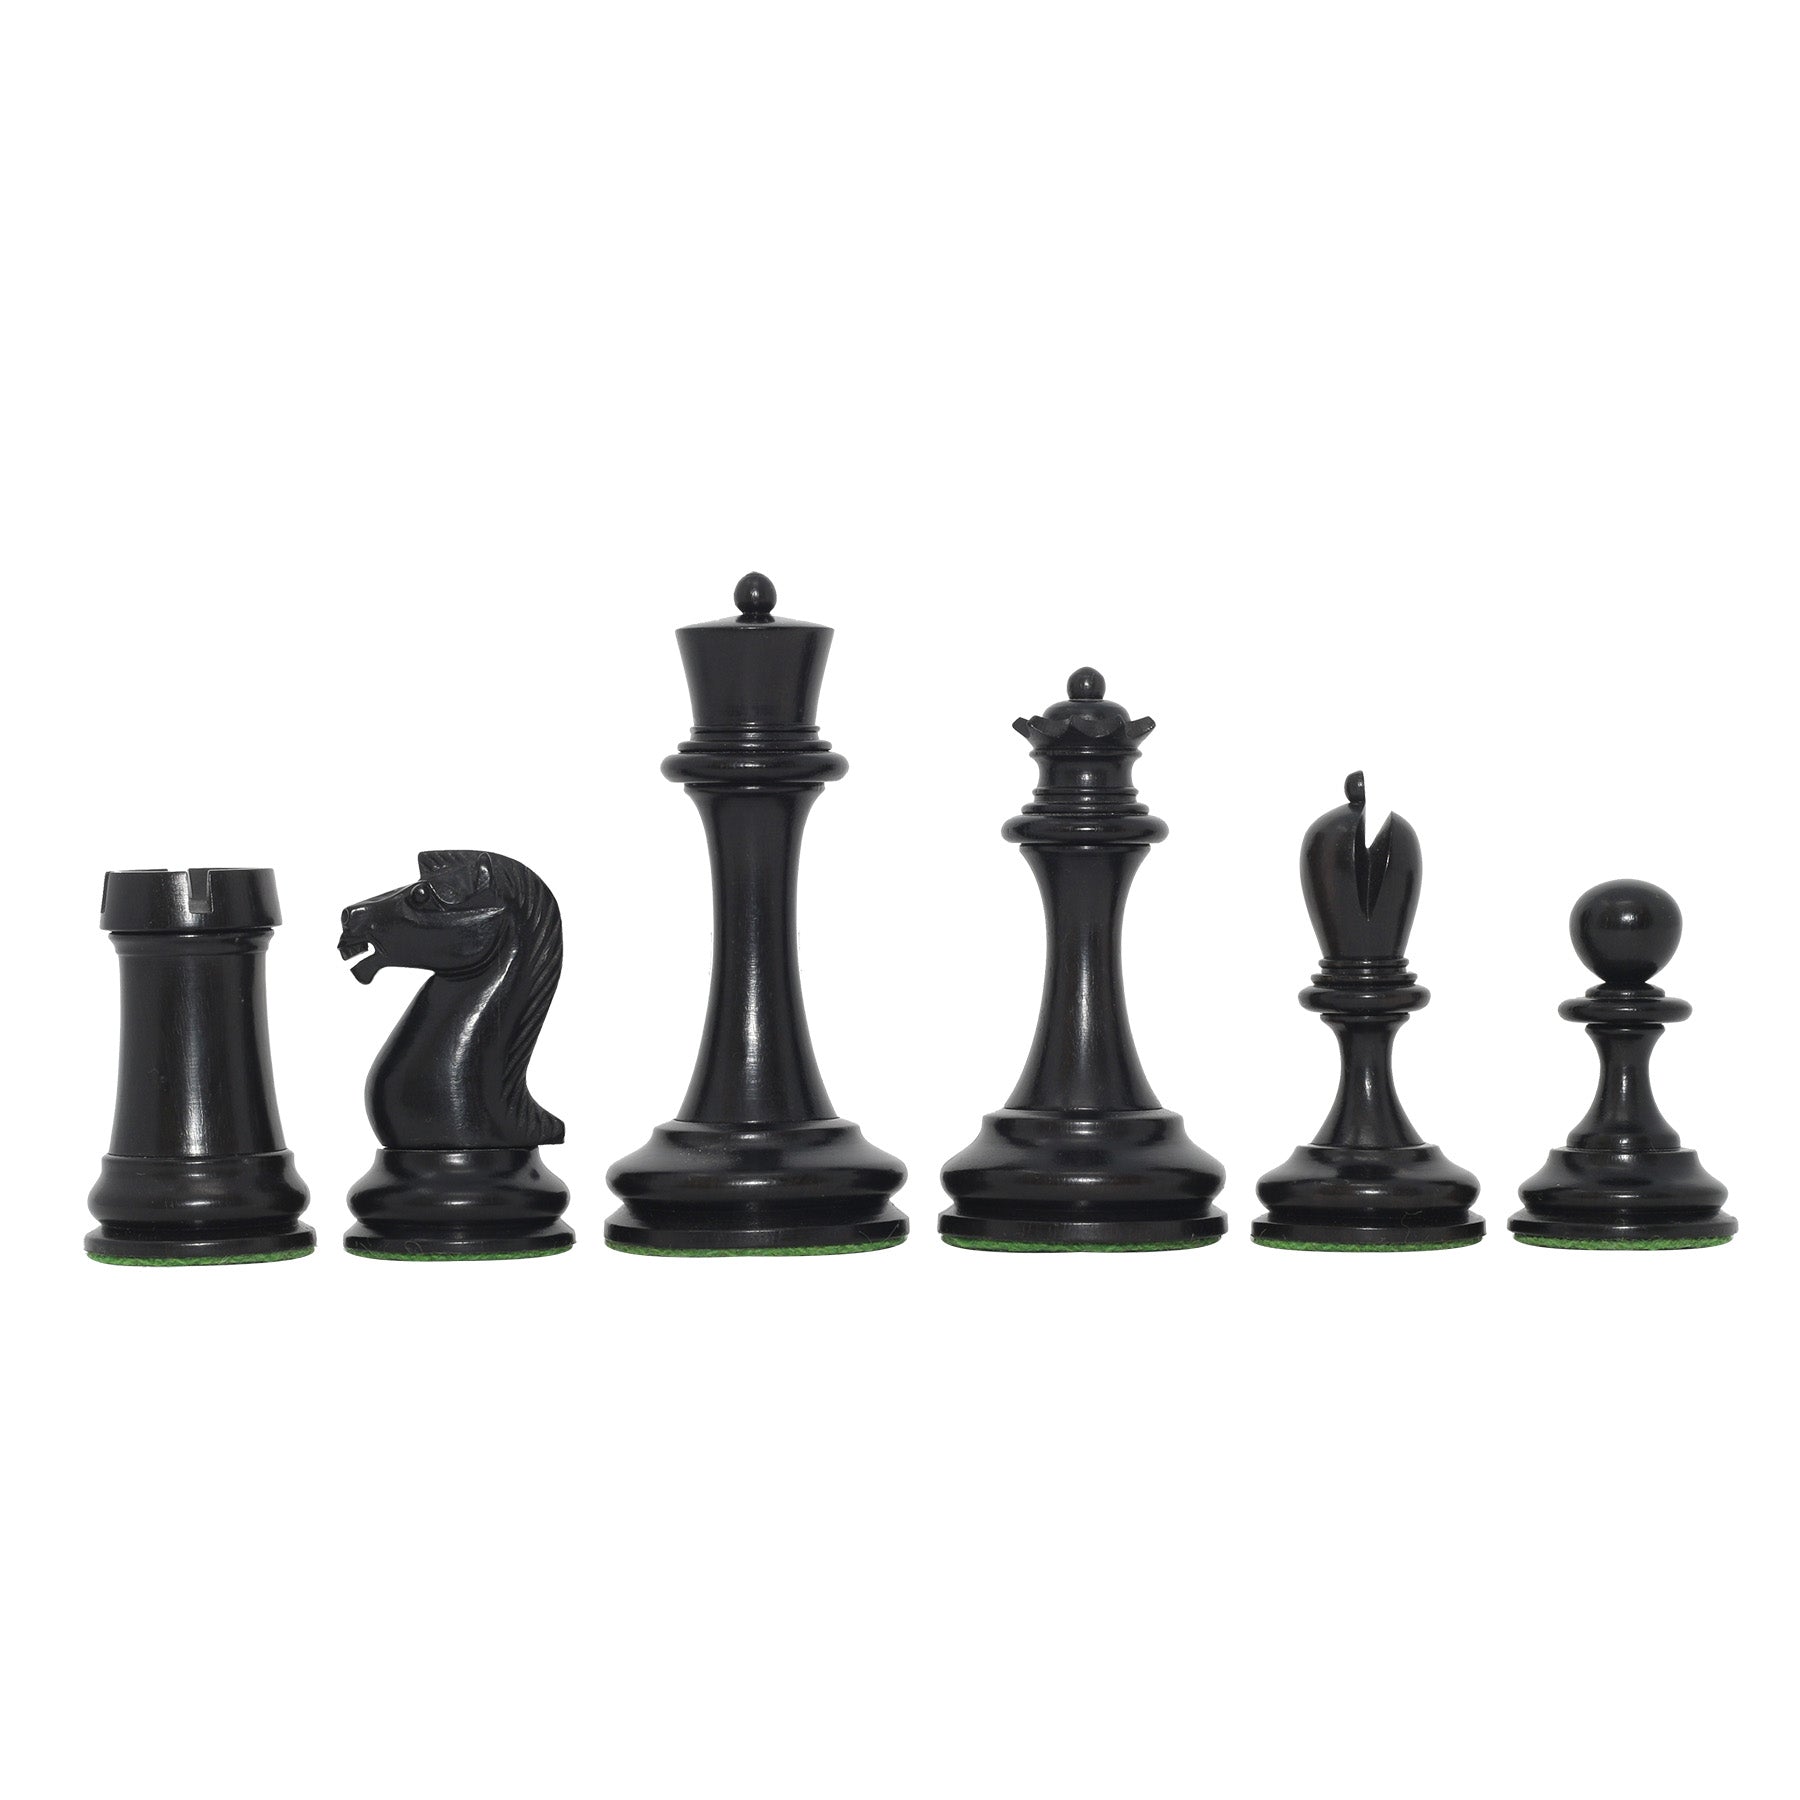 Reproduction Vintage B & Co 1860s Antique Chess Set in Ebony / Antiqued Box wood - 4" King